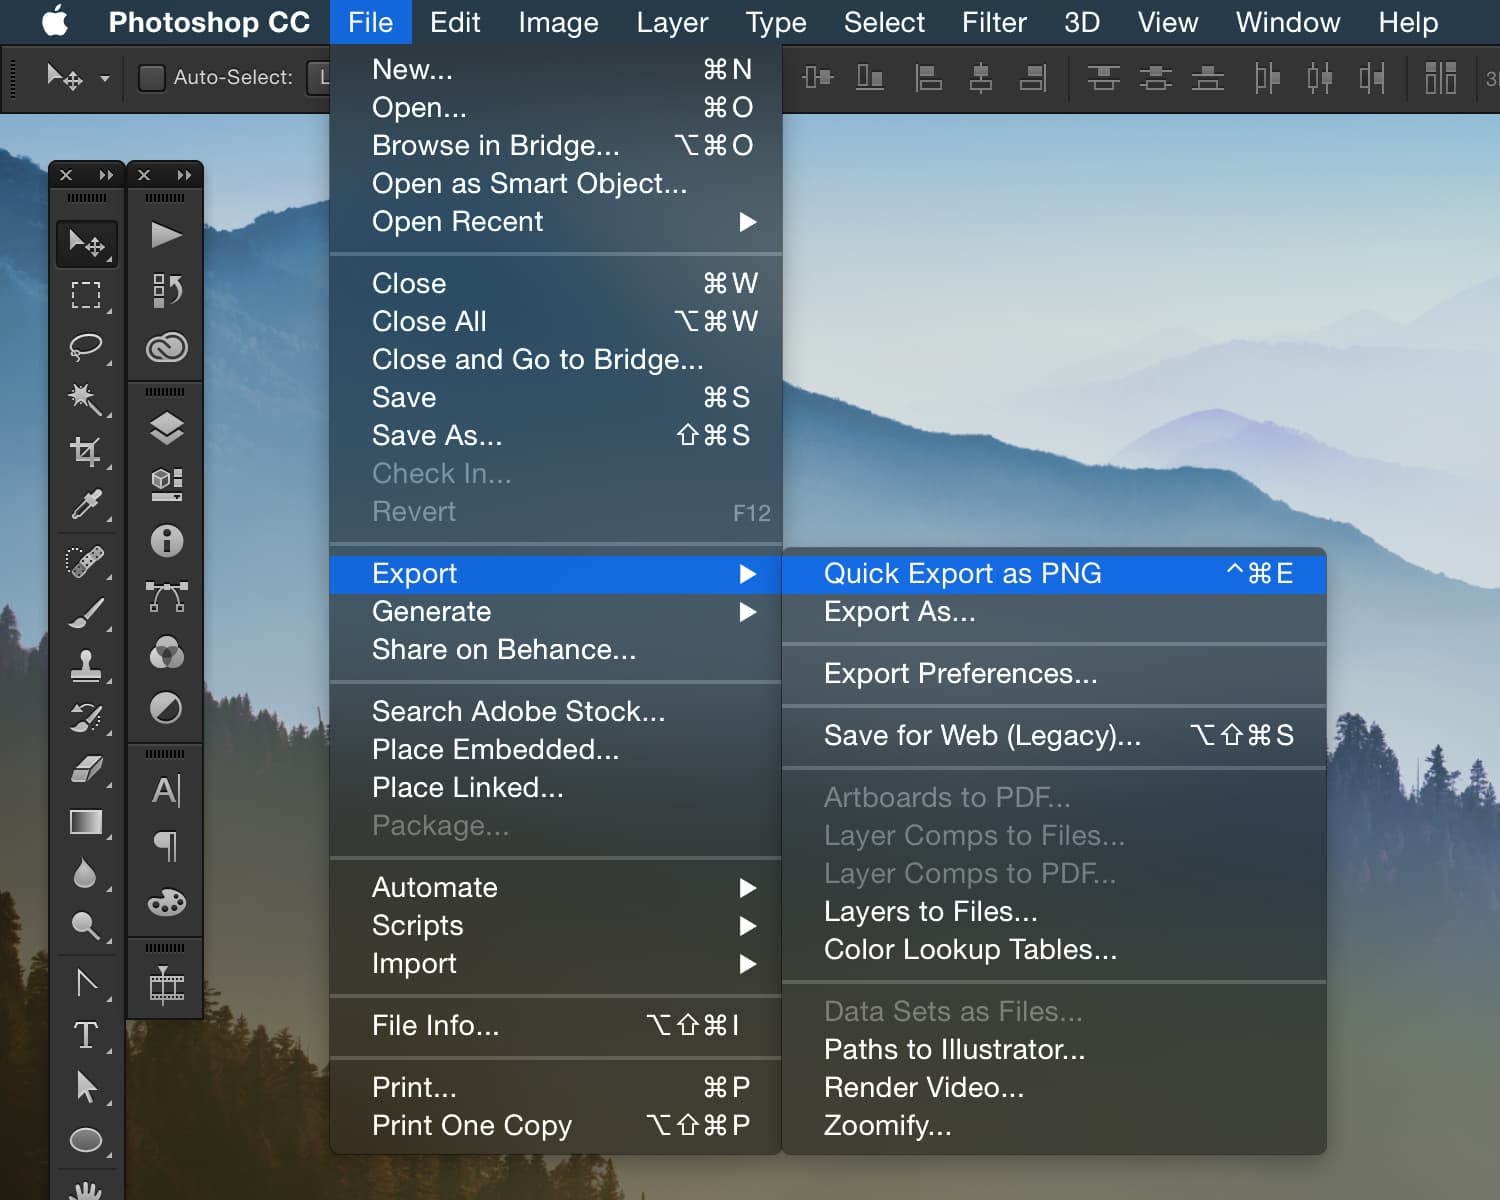 Quick Export as PNG shown in the Photoshop File menu